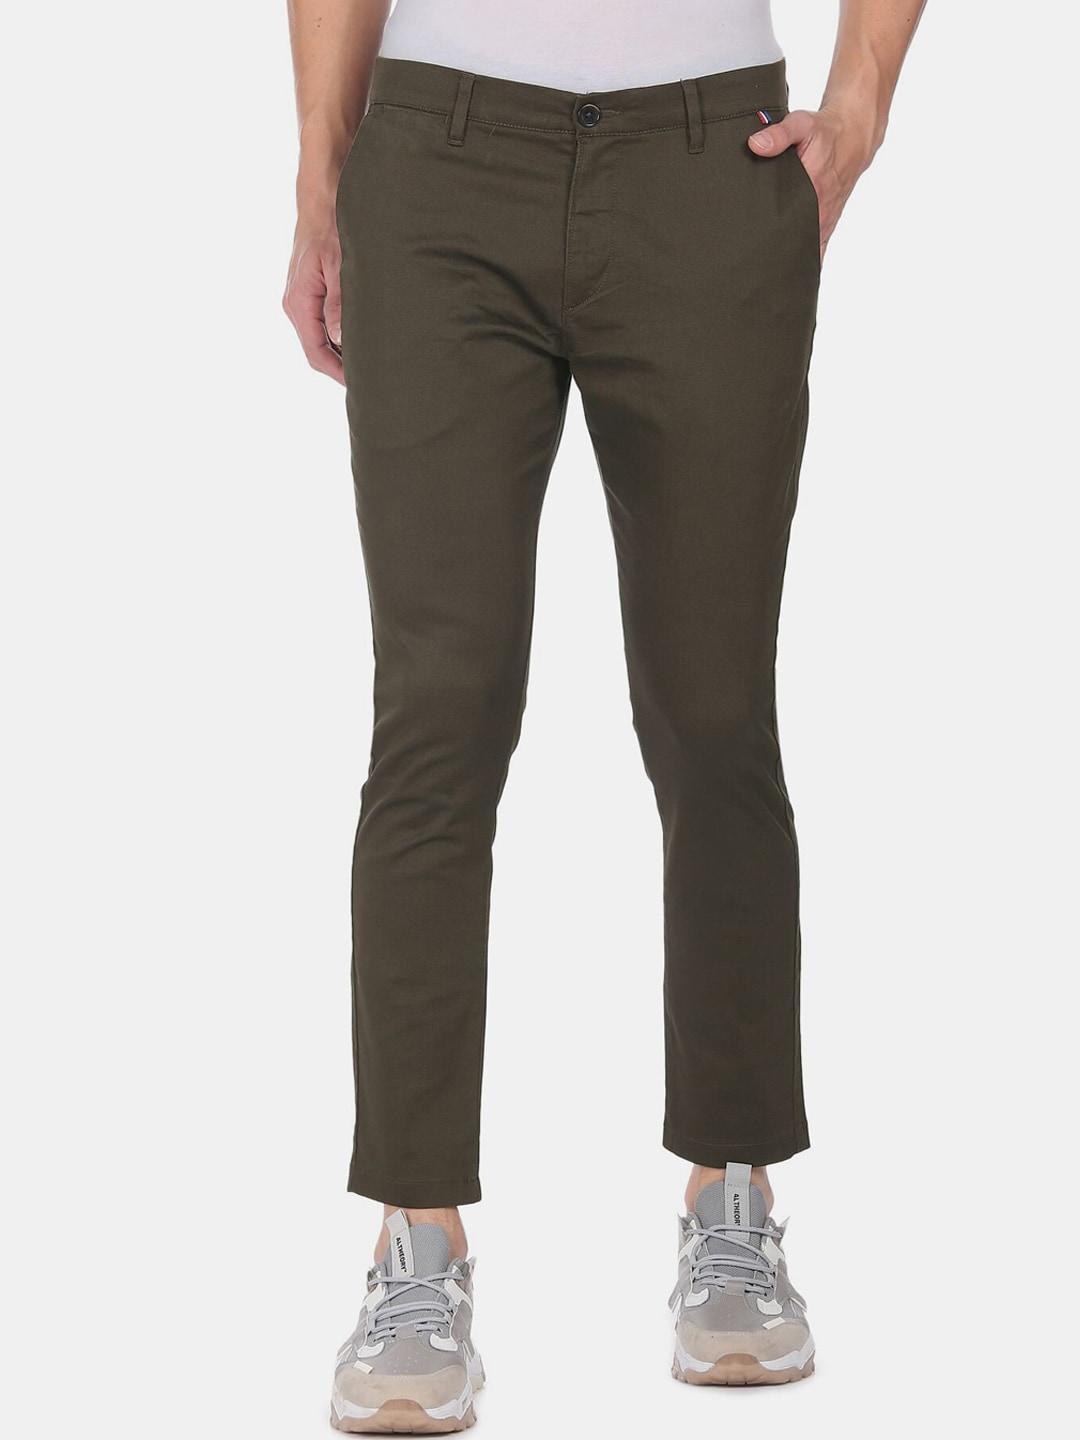 u.s. polo assn. men olive green trousers